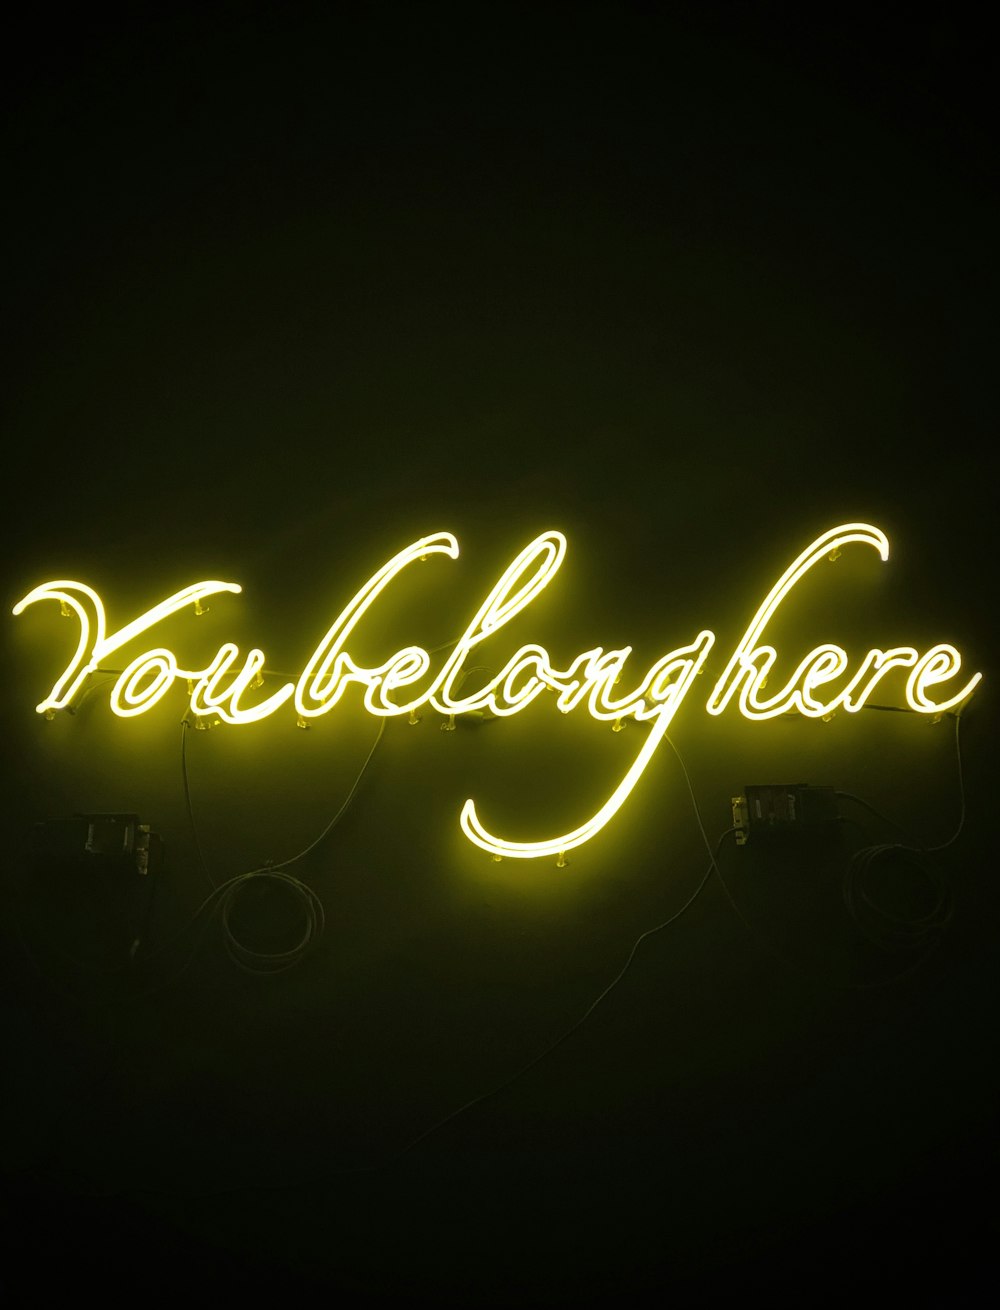 luci LED Voubelonghere gialle